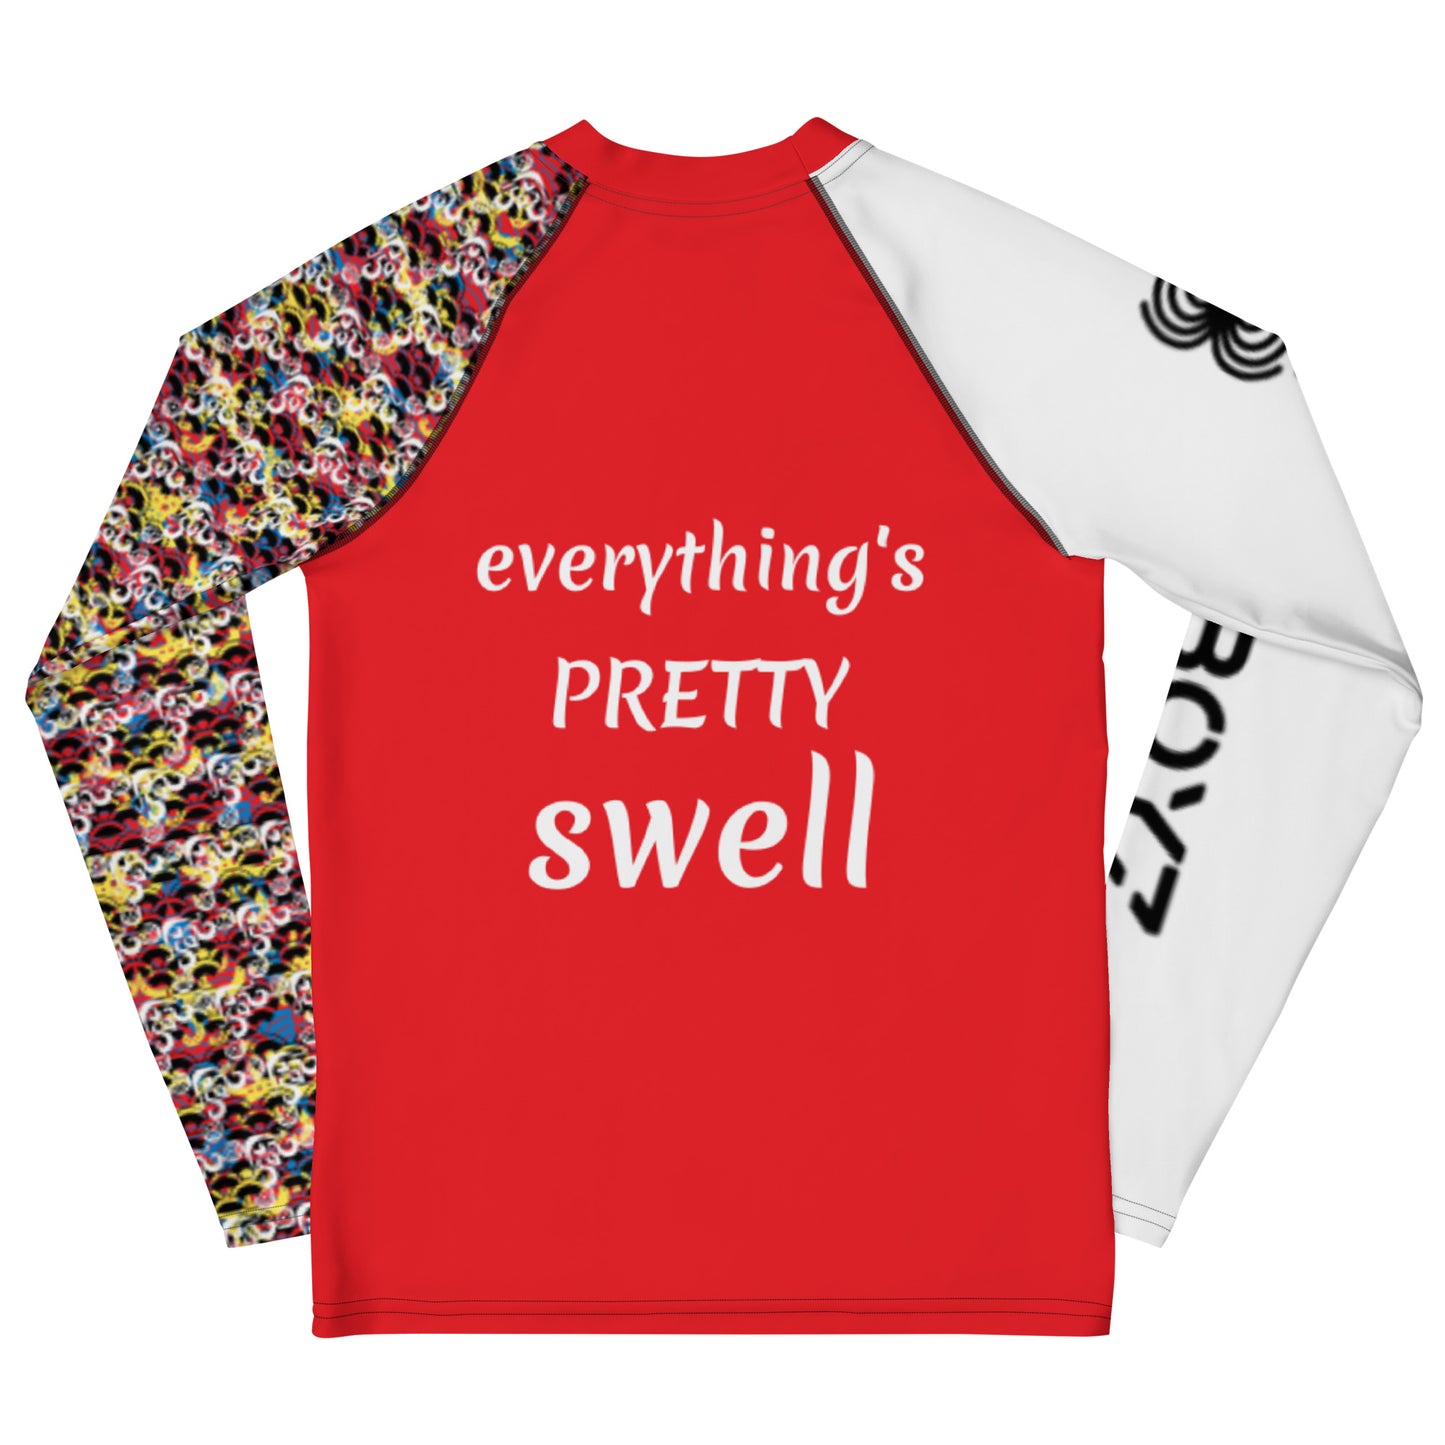 『Everything's Pretty SWELL』 ユースボーイズ サーフラッシュガード